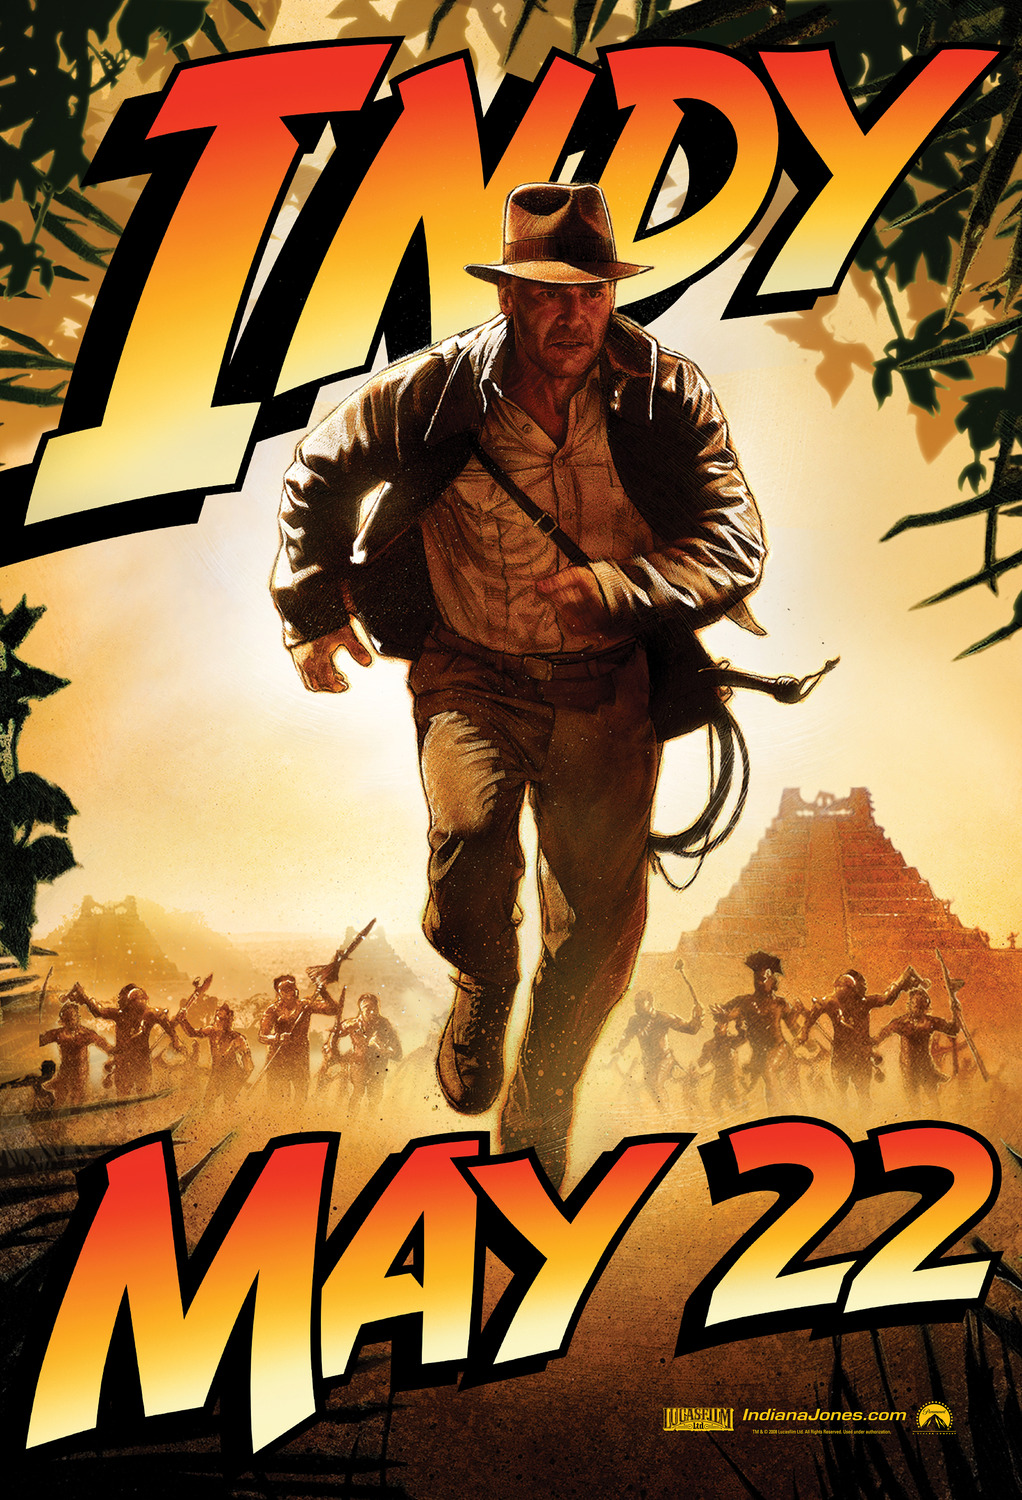 Extra Large Movie Poster Image for Indiana Jones and the Kingdom of the Crystal Skull (#5 of 11)